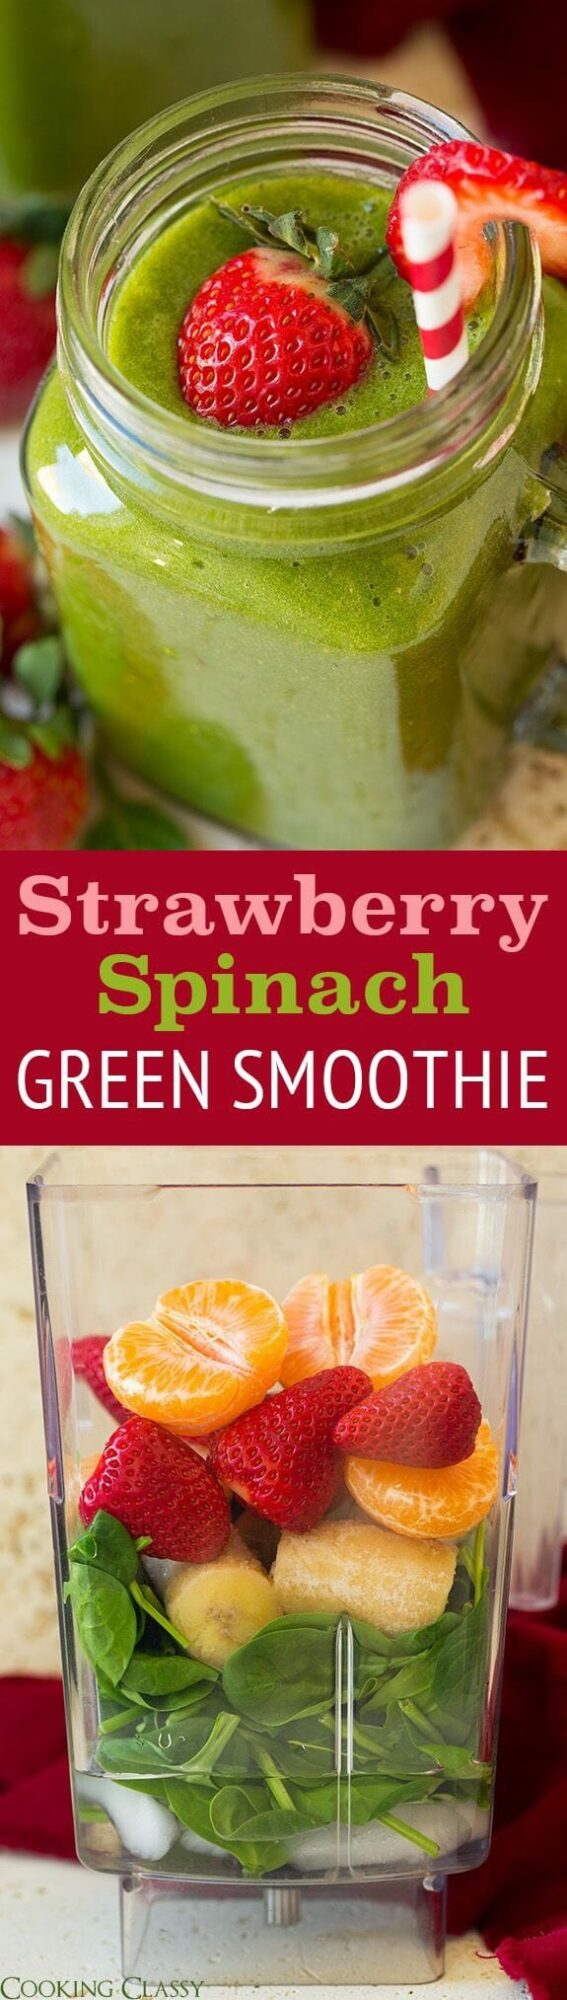 The Best Green Smoothie Recipes: 15 Great Ideas (Part 1)